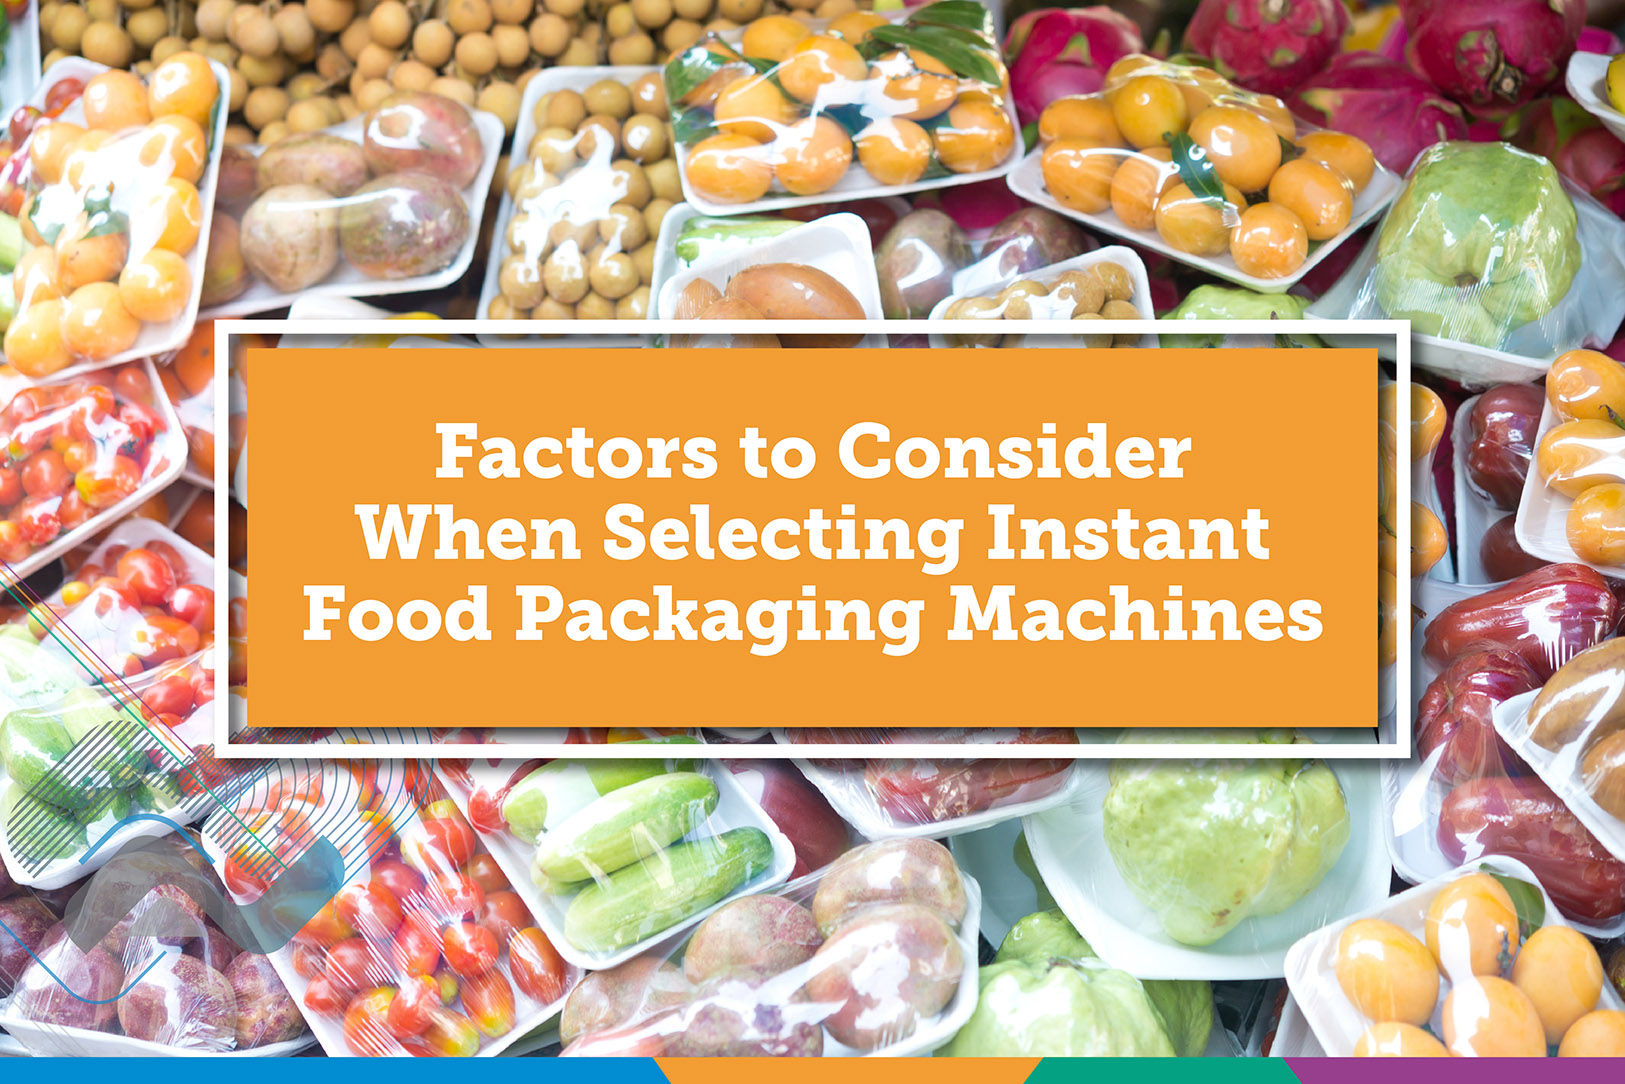 Factors to Consider When Selecting Instant Food Packaging Machines